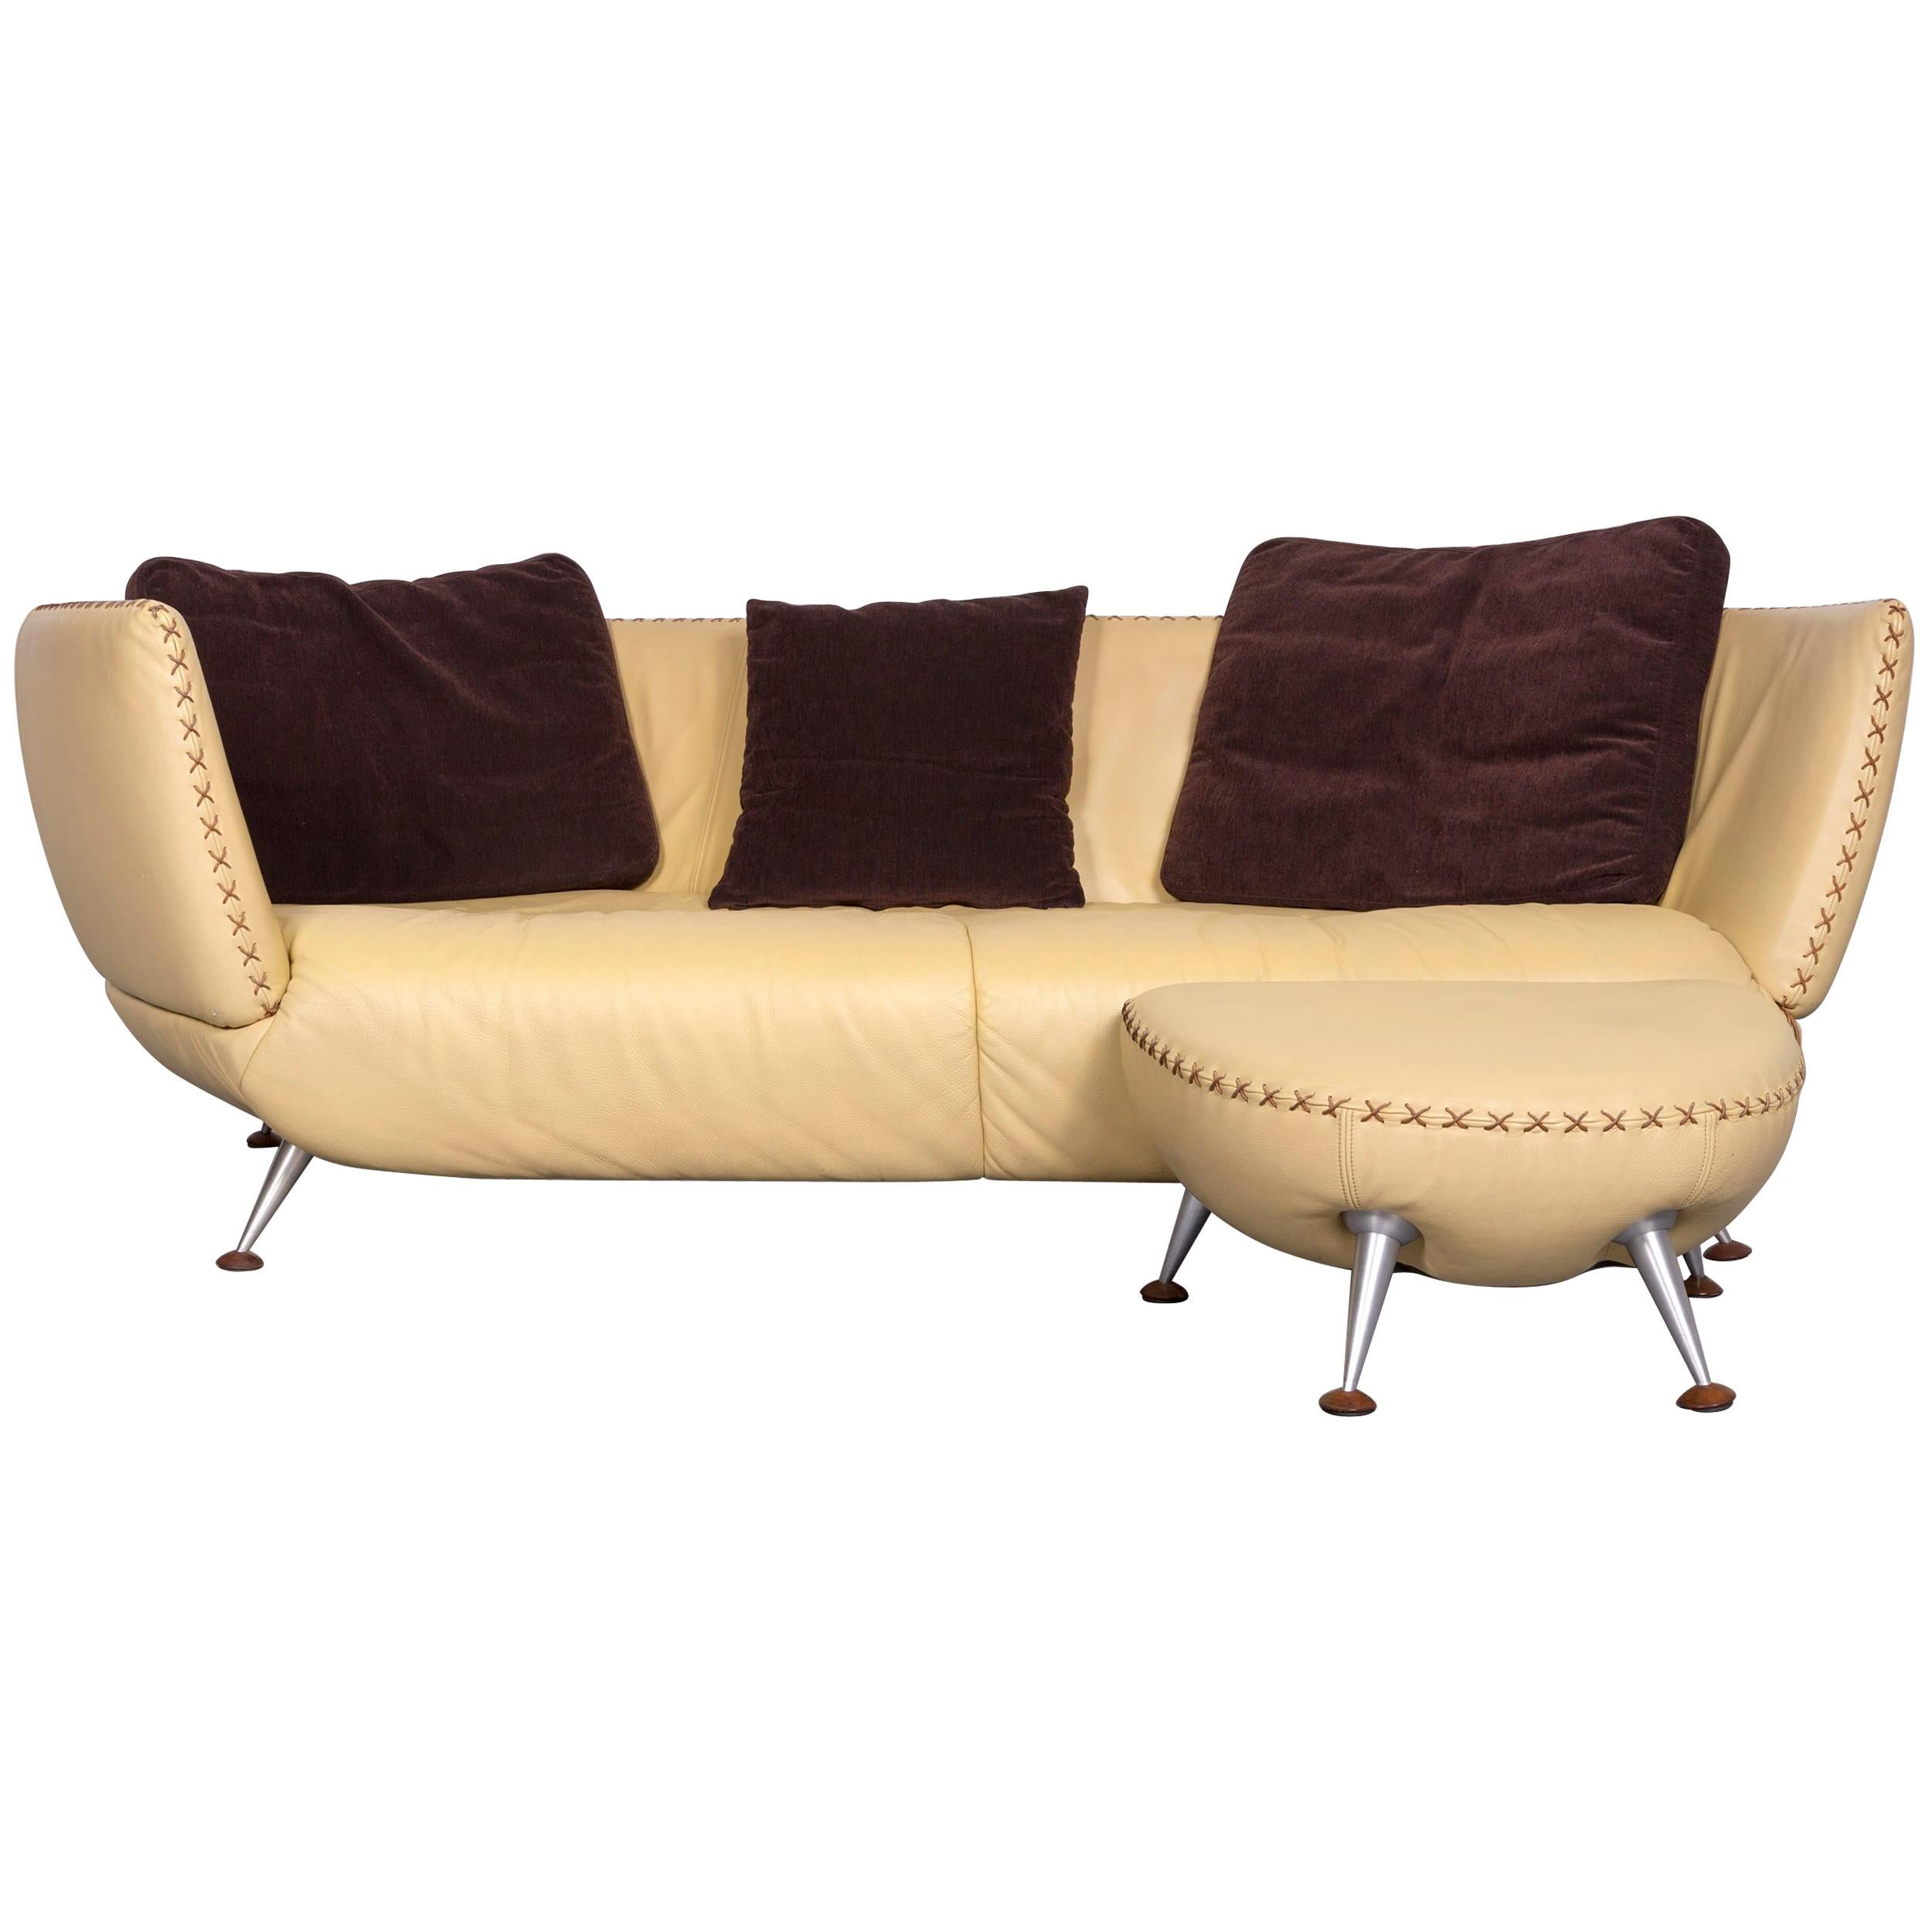 De Sede Ds 102 Designer Leather Sofa Beige Three-Seat Couch with Footstool For Sale